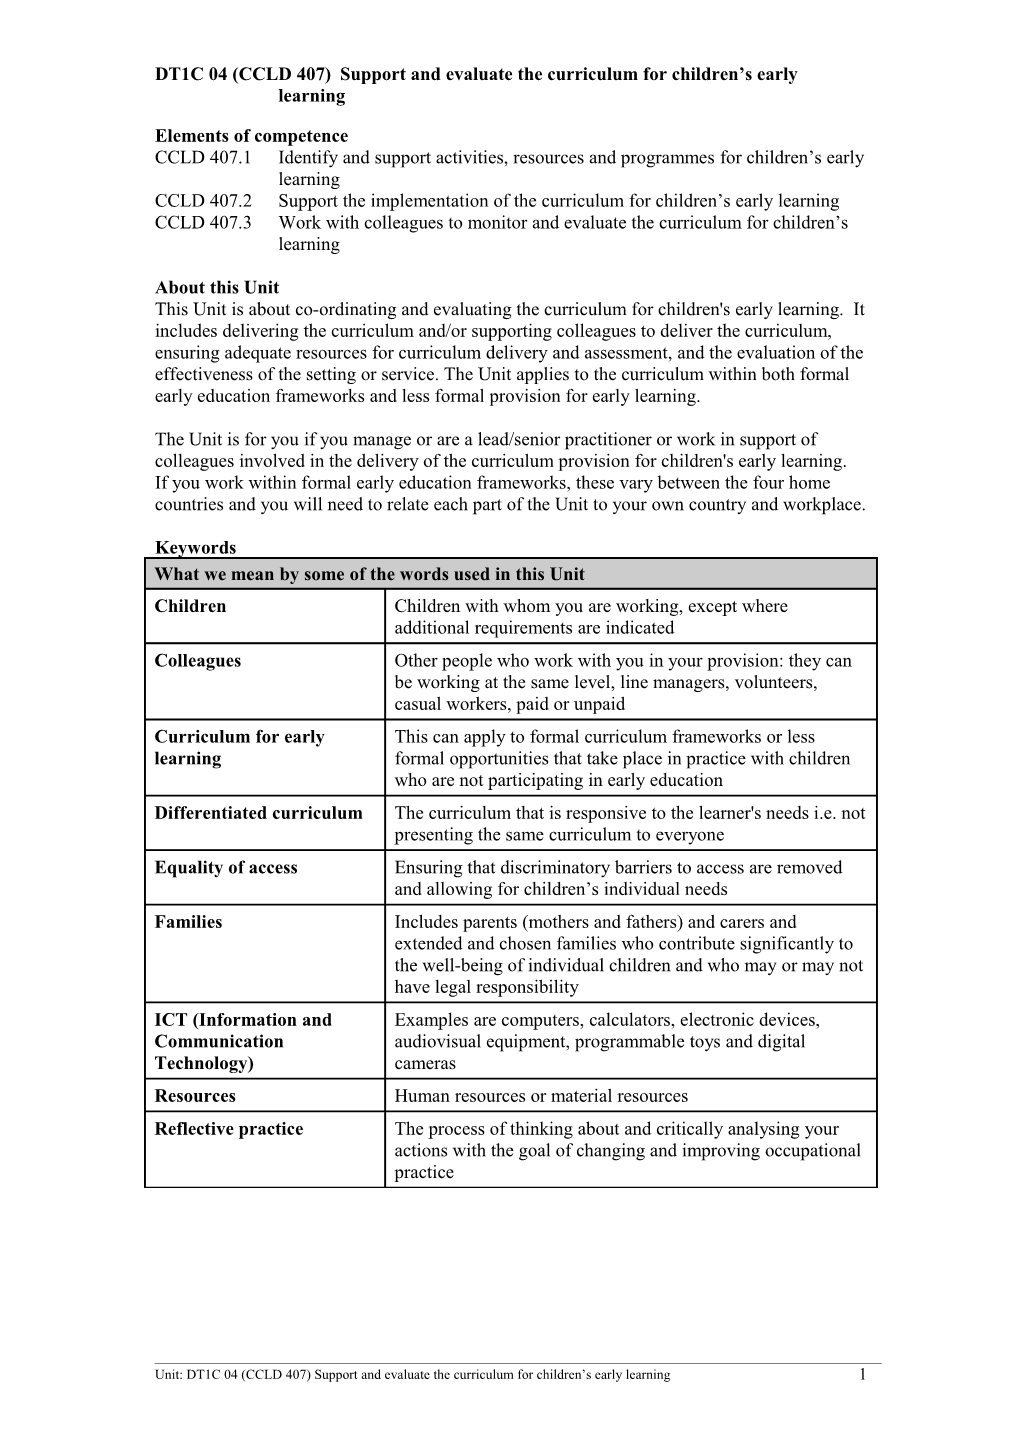 DT1C 04 (CCLD 407)Support and Evaluate the Curriculum for Children S Early Learning